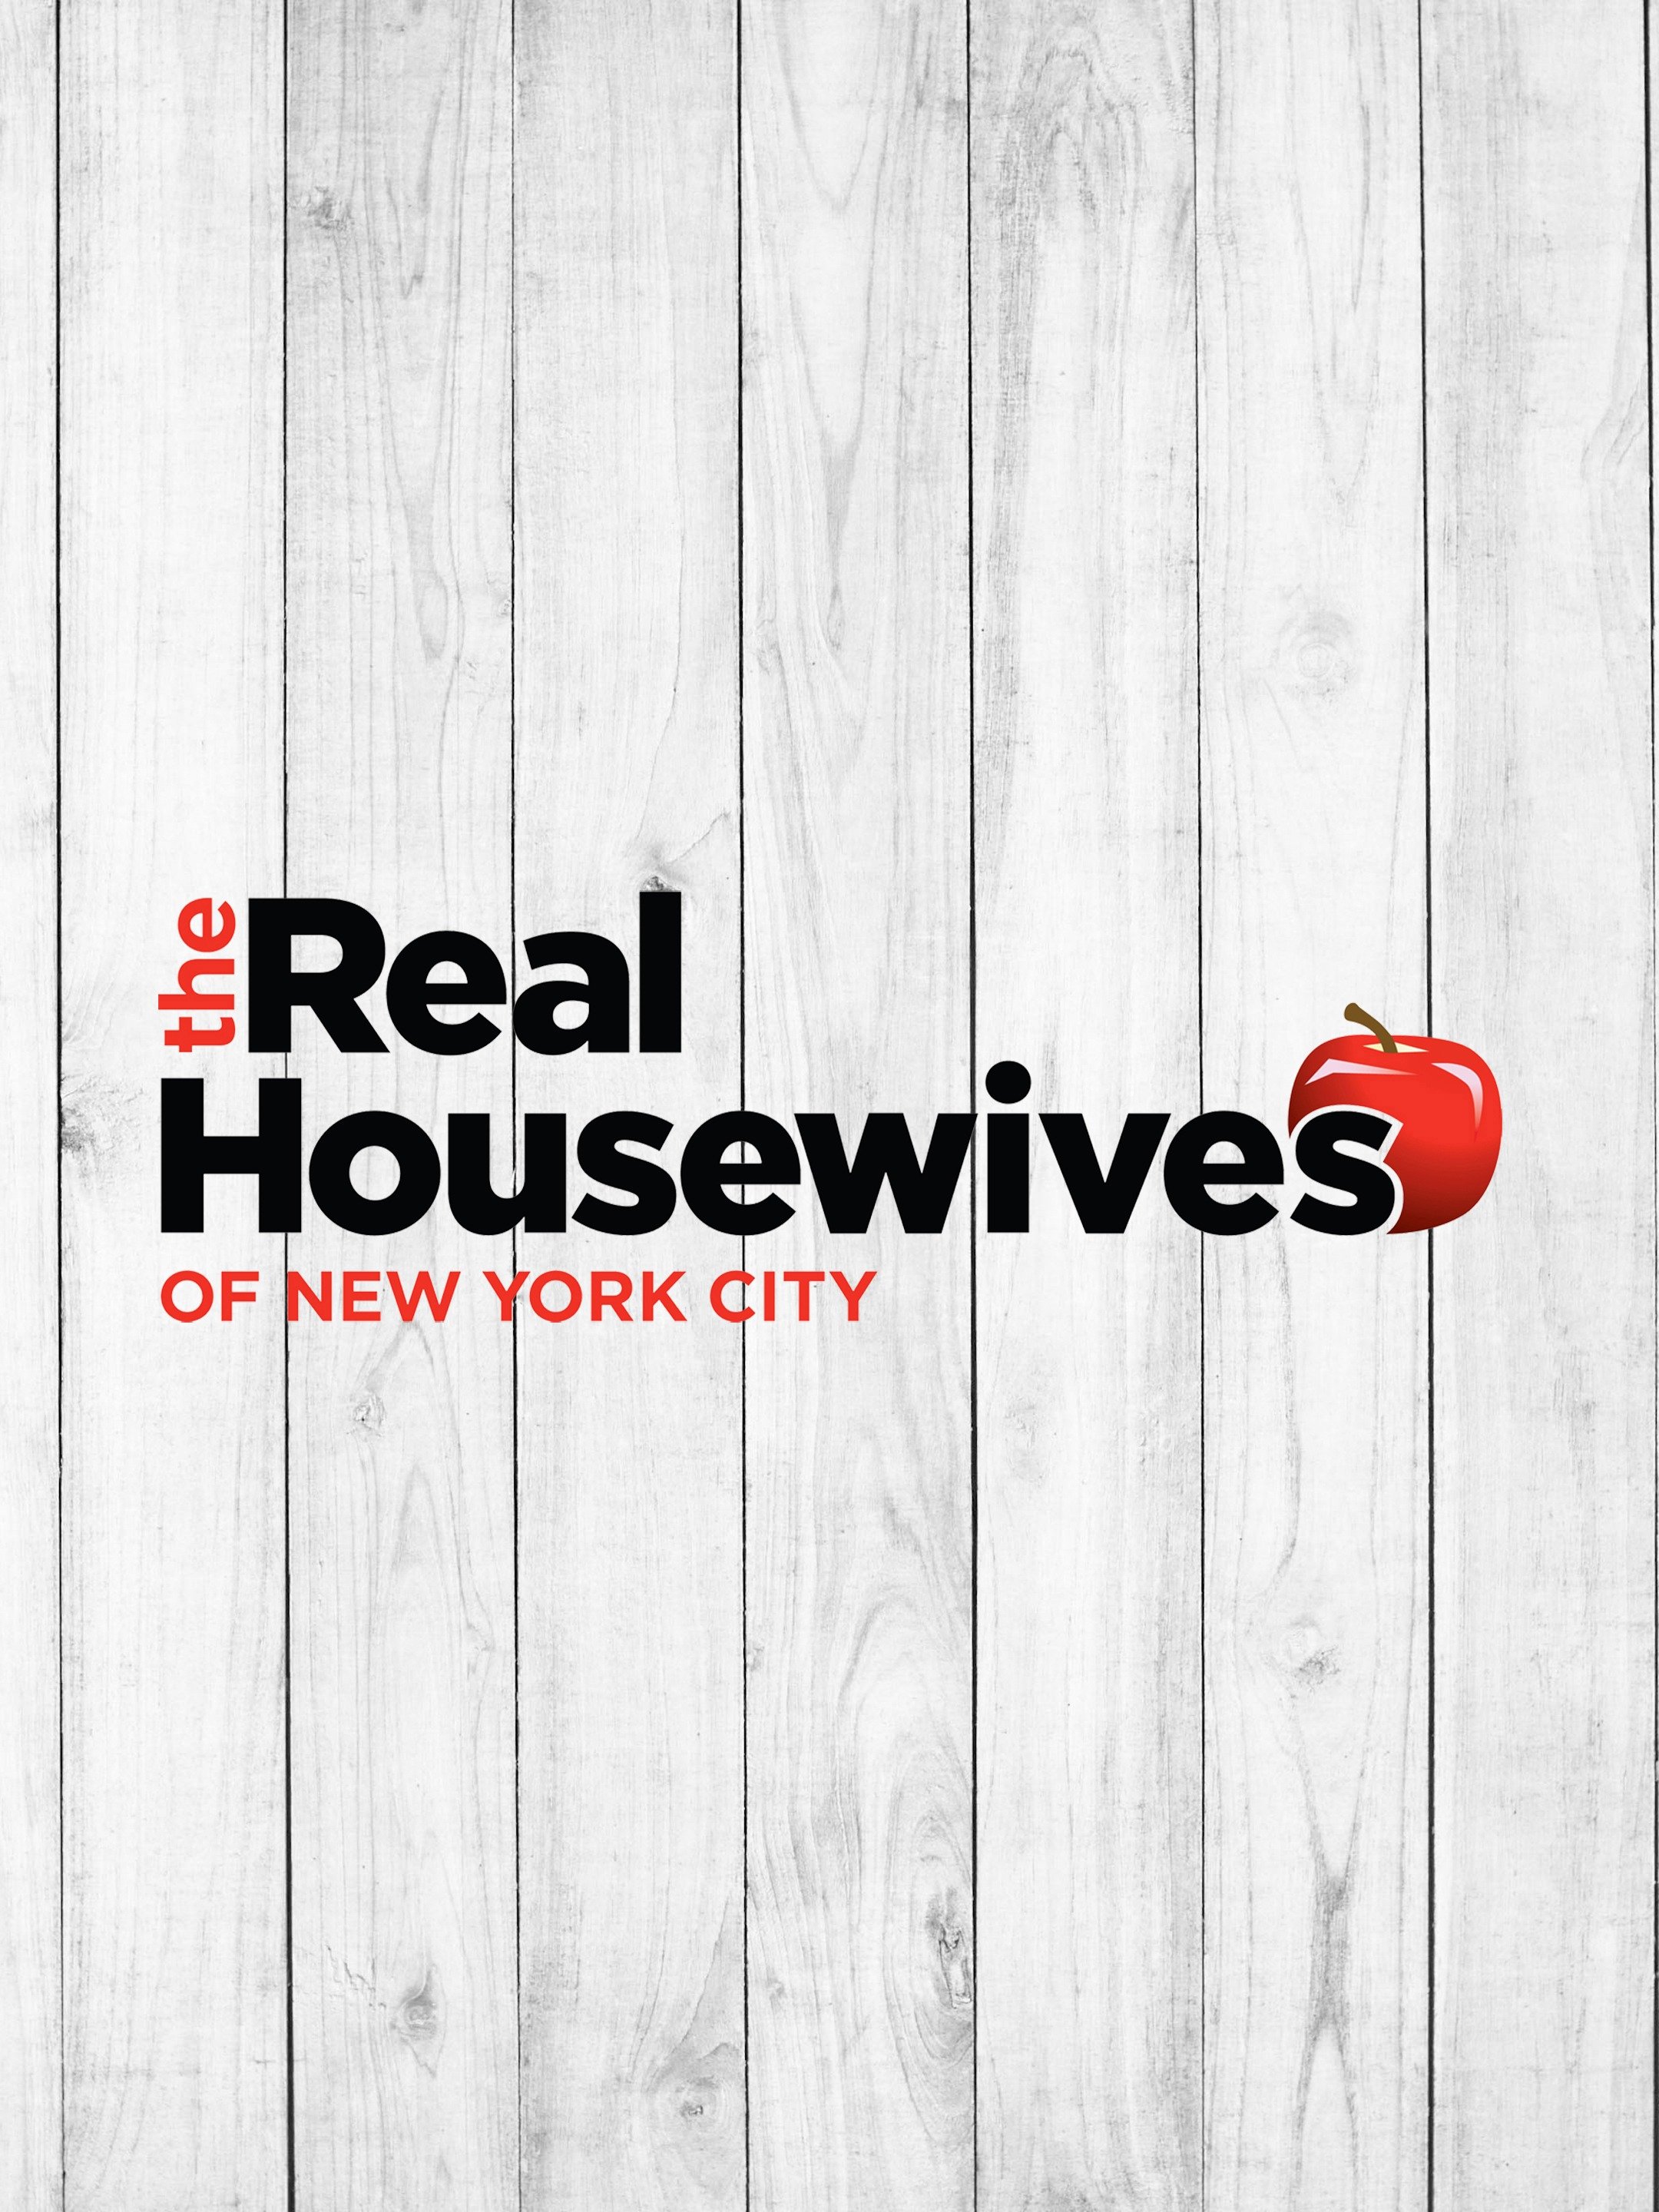 The Real Housewives of New York City picture